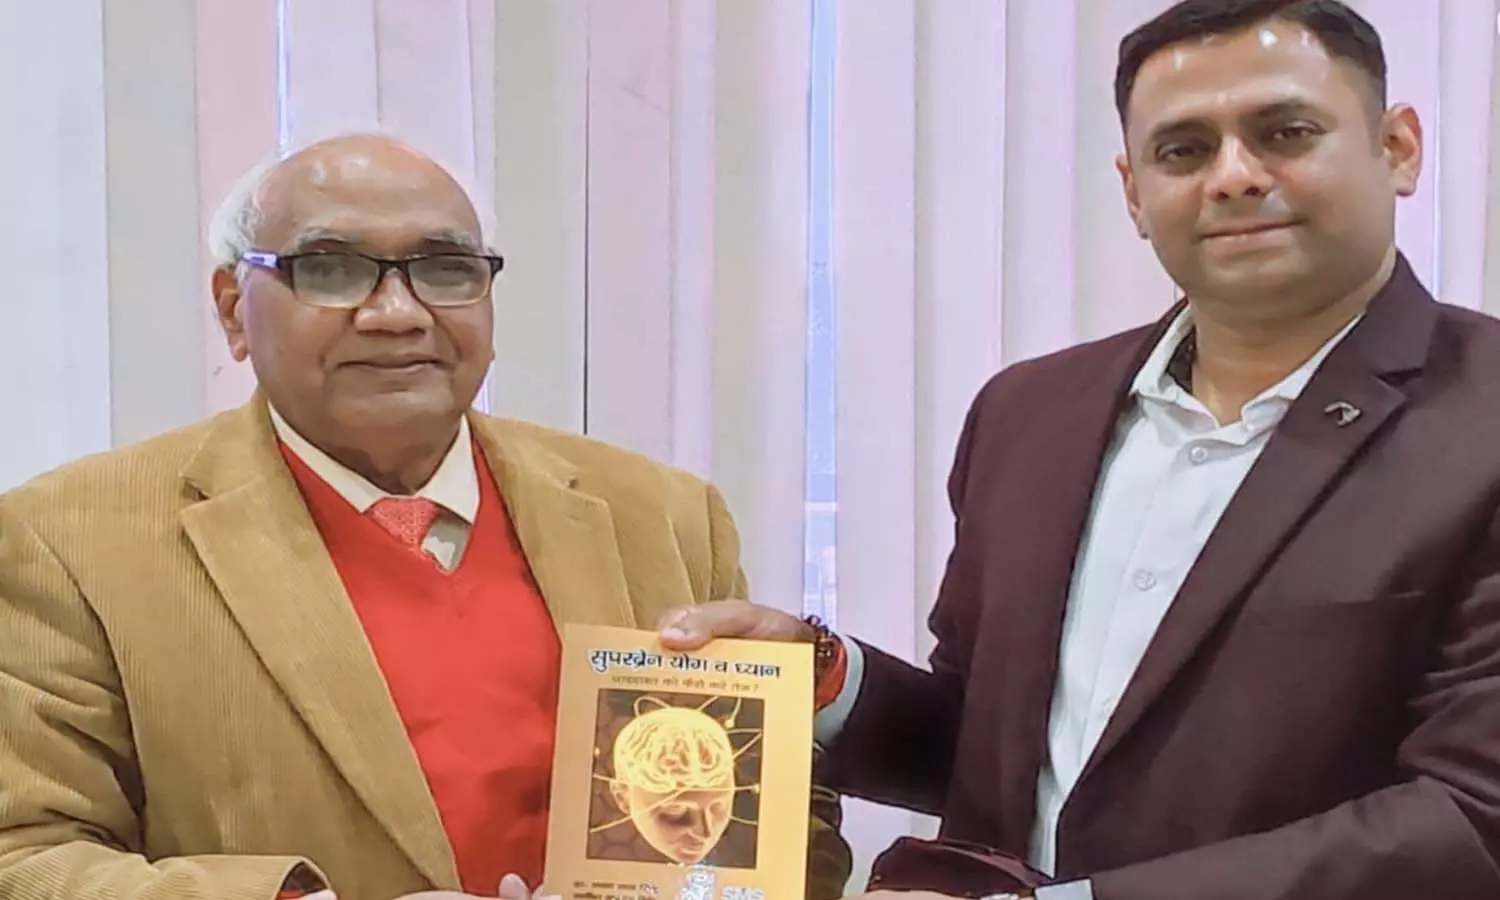 Super brain Yoga and Meditation: Book published by Vedic Vigyan Kendra on Superbrain Yoga and Meditation released